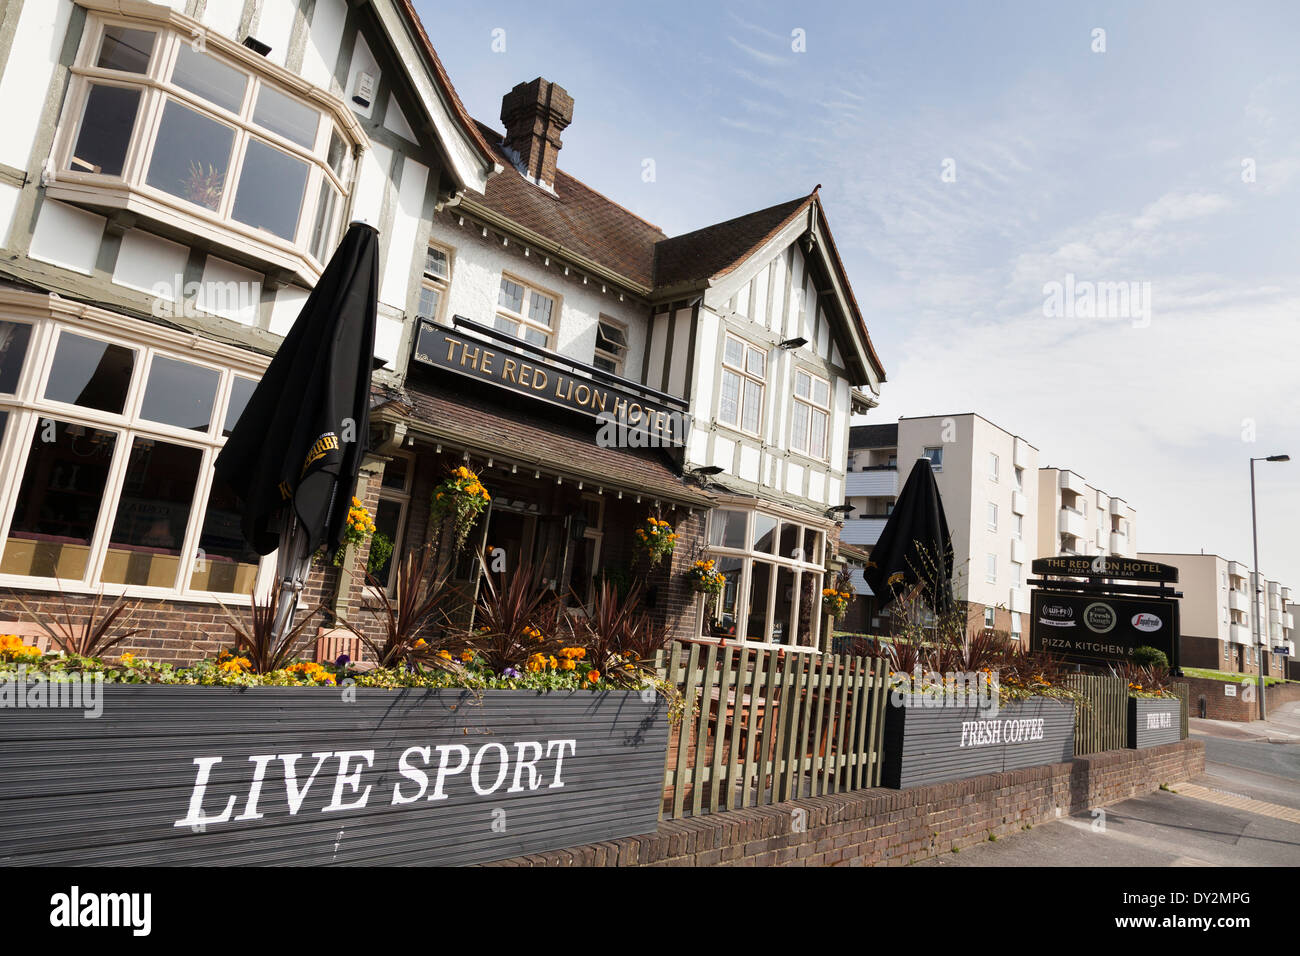 Pub exterior advertising 'live sport', 'Fresh Coffee' and 'free Wi-Fi' to attract customers. Stock Photo